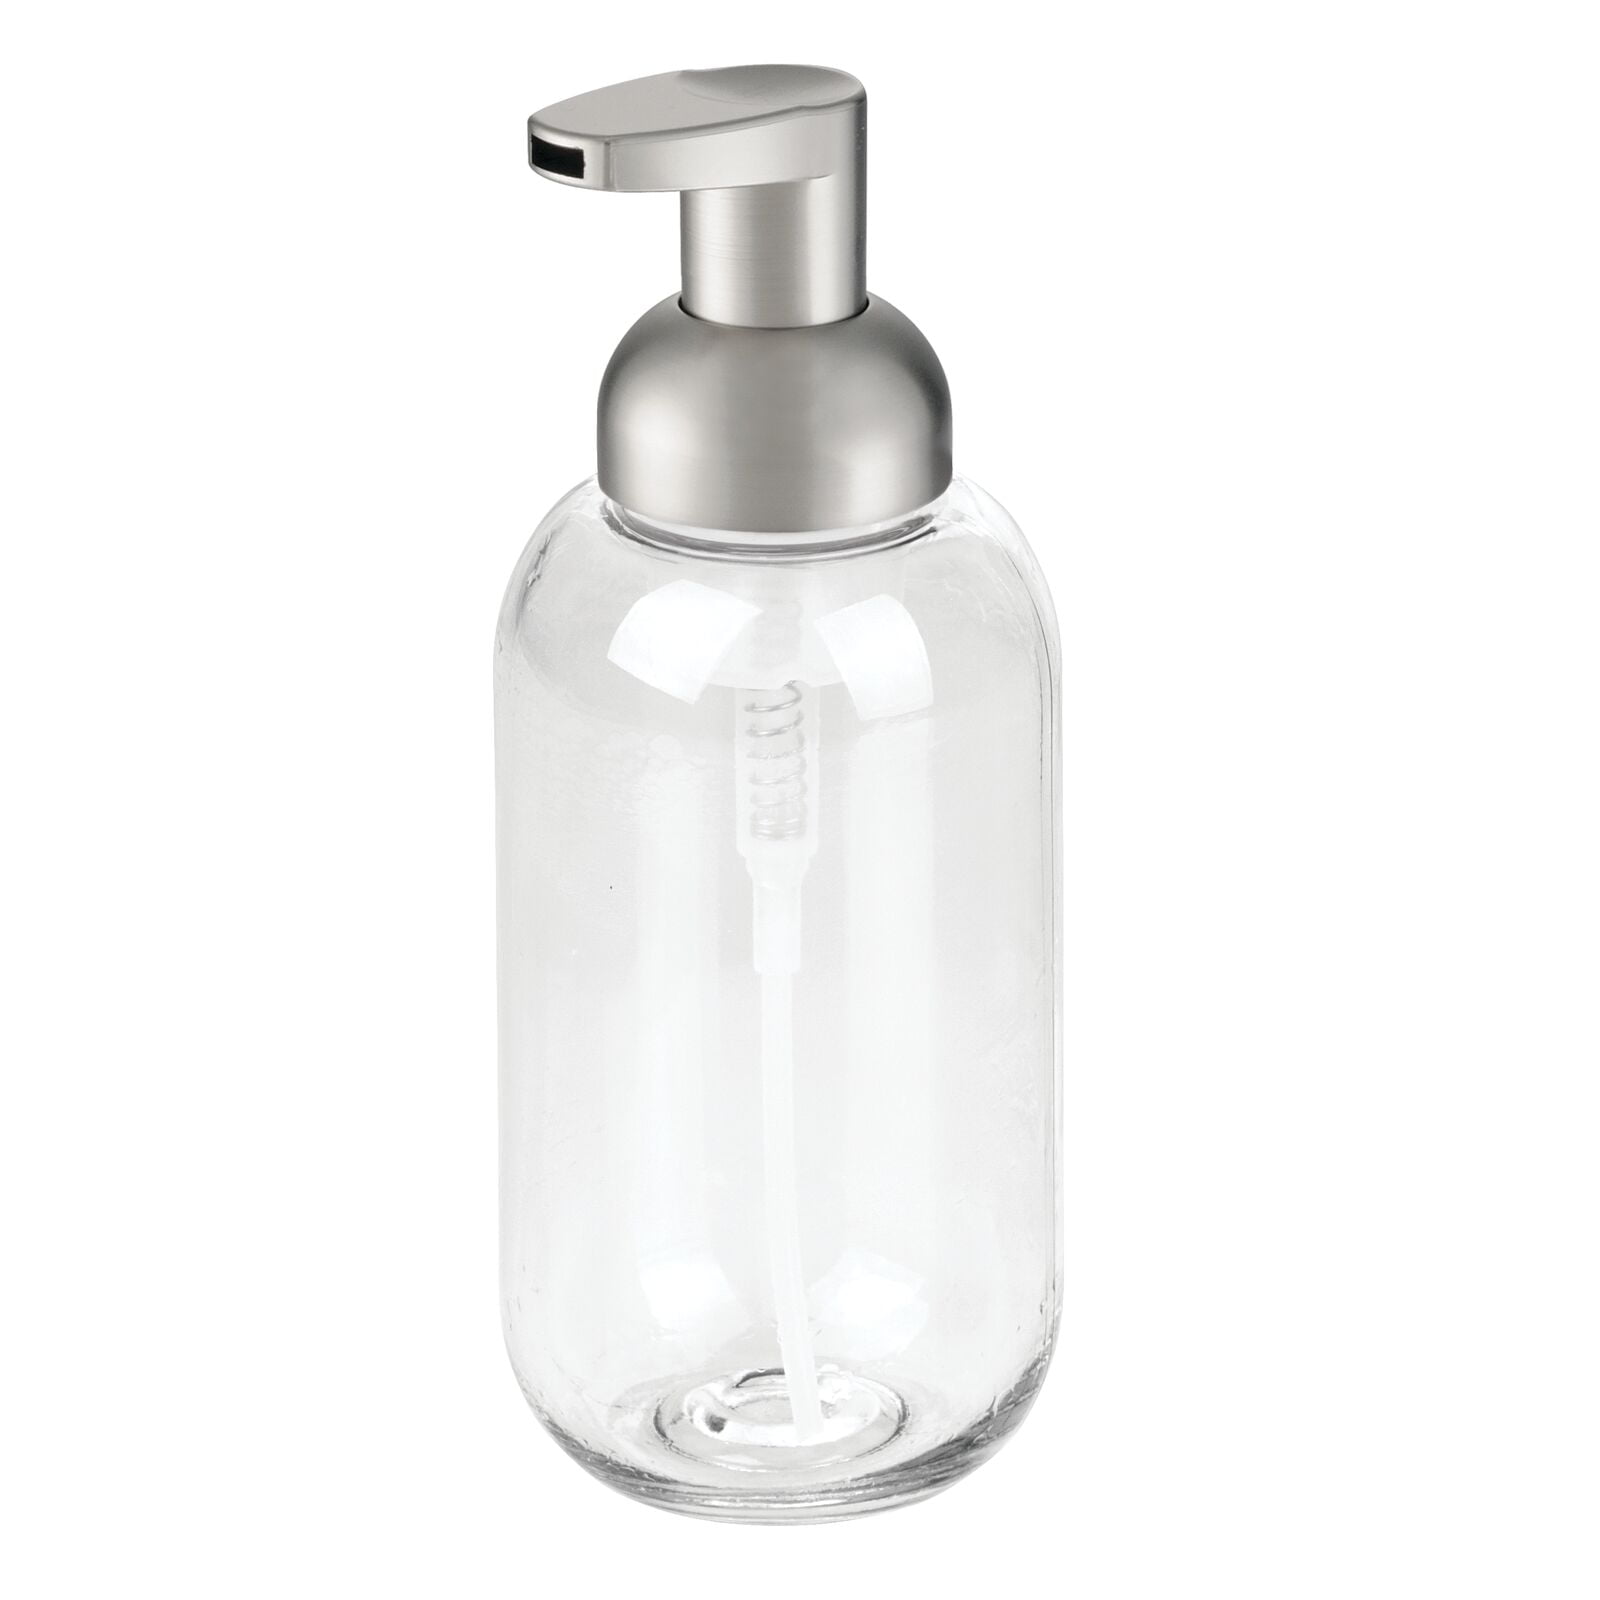 210mL PET CLEAR Bottles with Foam Pumps (24 Pack) : Foaming Soap Pumps, Foam  Pump Bottles, Foam Dispensers and more